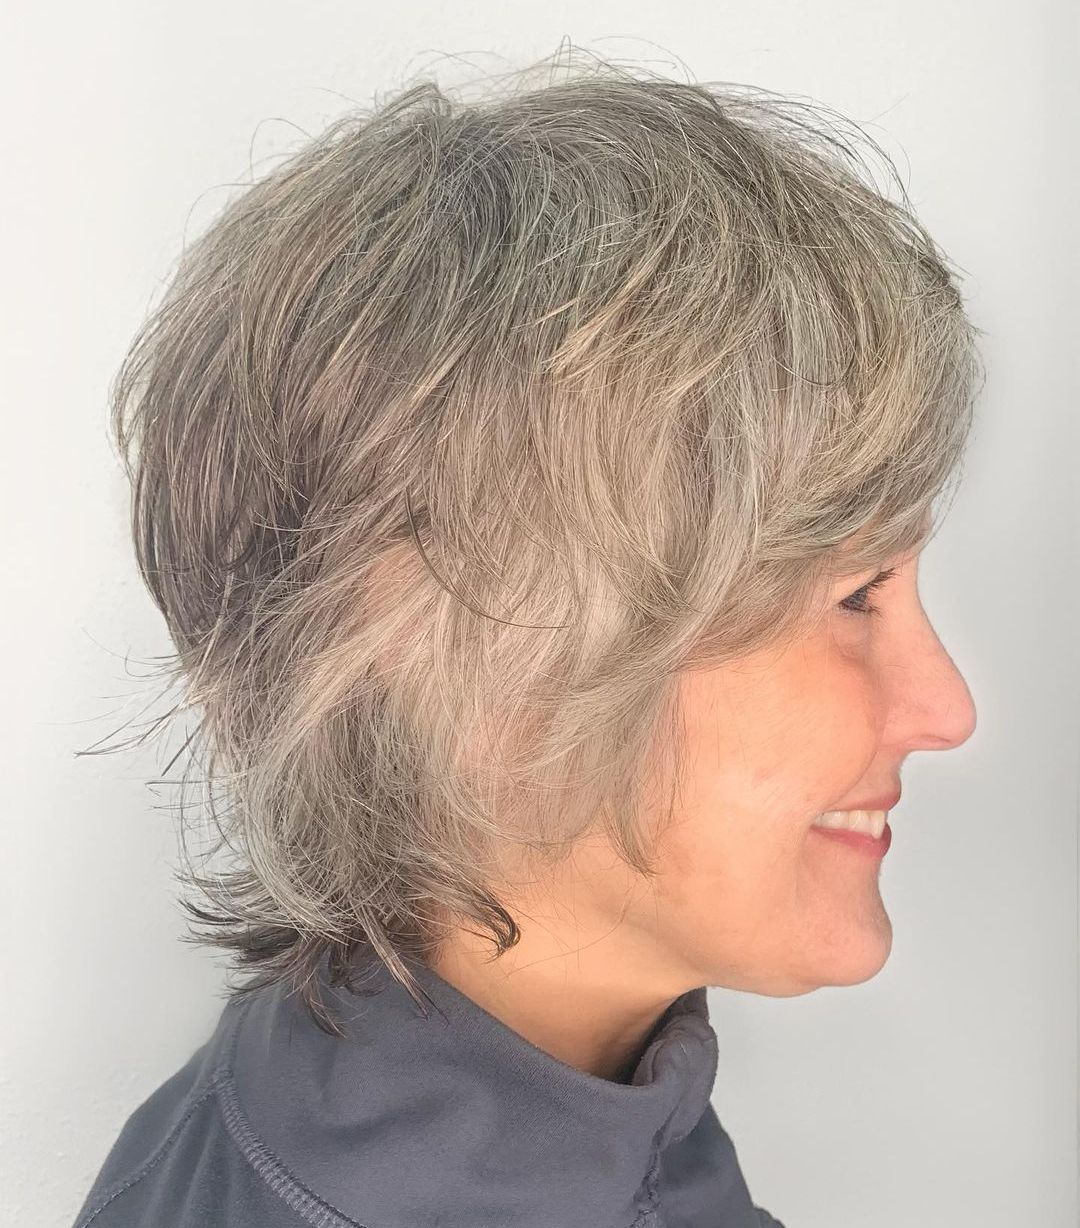 Short Silver Shag with Soft Feathery Finish